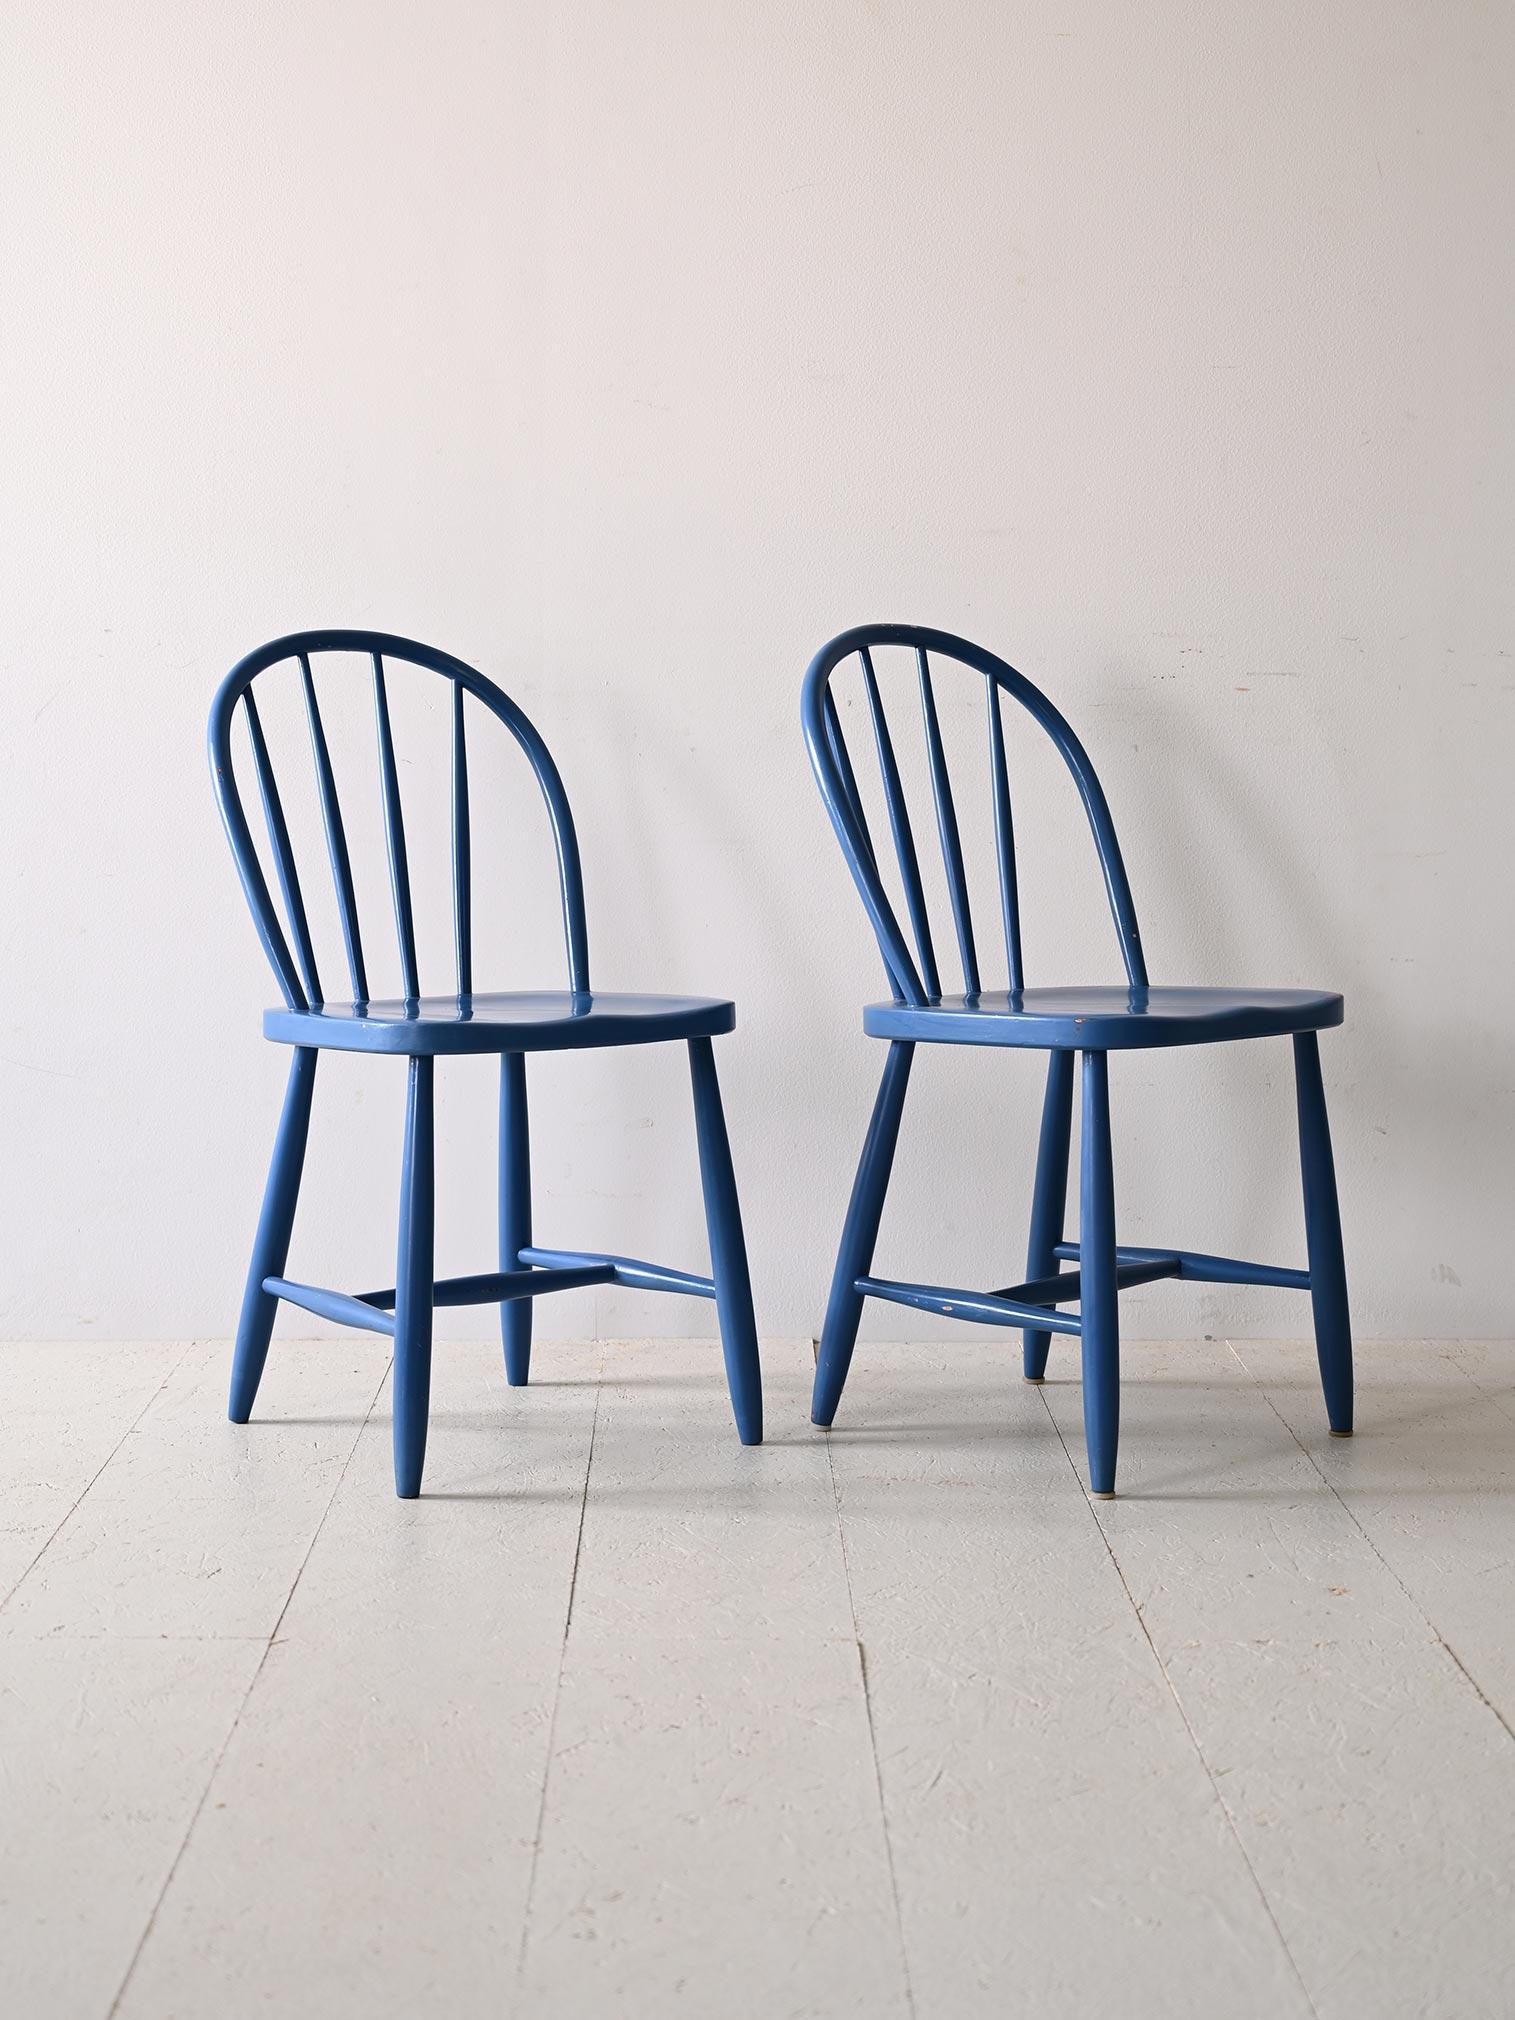 Pair of original Scandinavian 1960s blue wooden chairs.

This pair of wooden chairs features a back and legs with an elegant Nordic design, featuring a rounded shape that extends to both the backrest and tapered legs. Their simple, vintage style